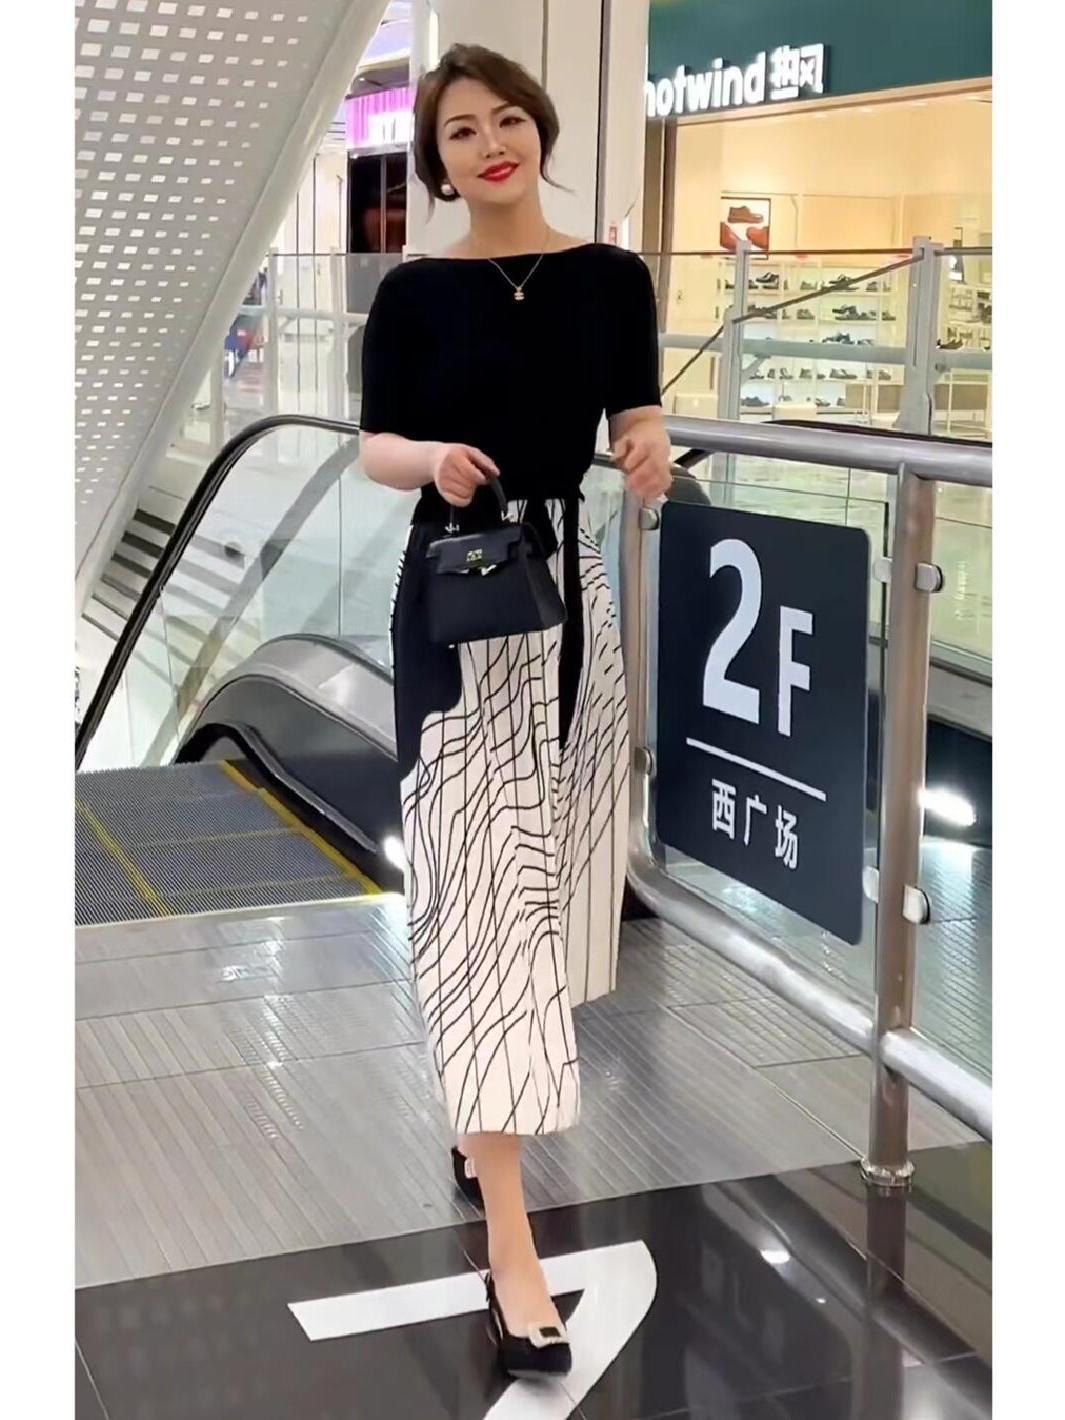 New Elegant Suit Skirt Niche round Neck Tied Design Short Sleeve Top High Waist Thin Looking Cool Striped Pleated Skirt